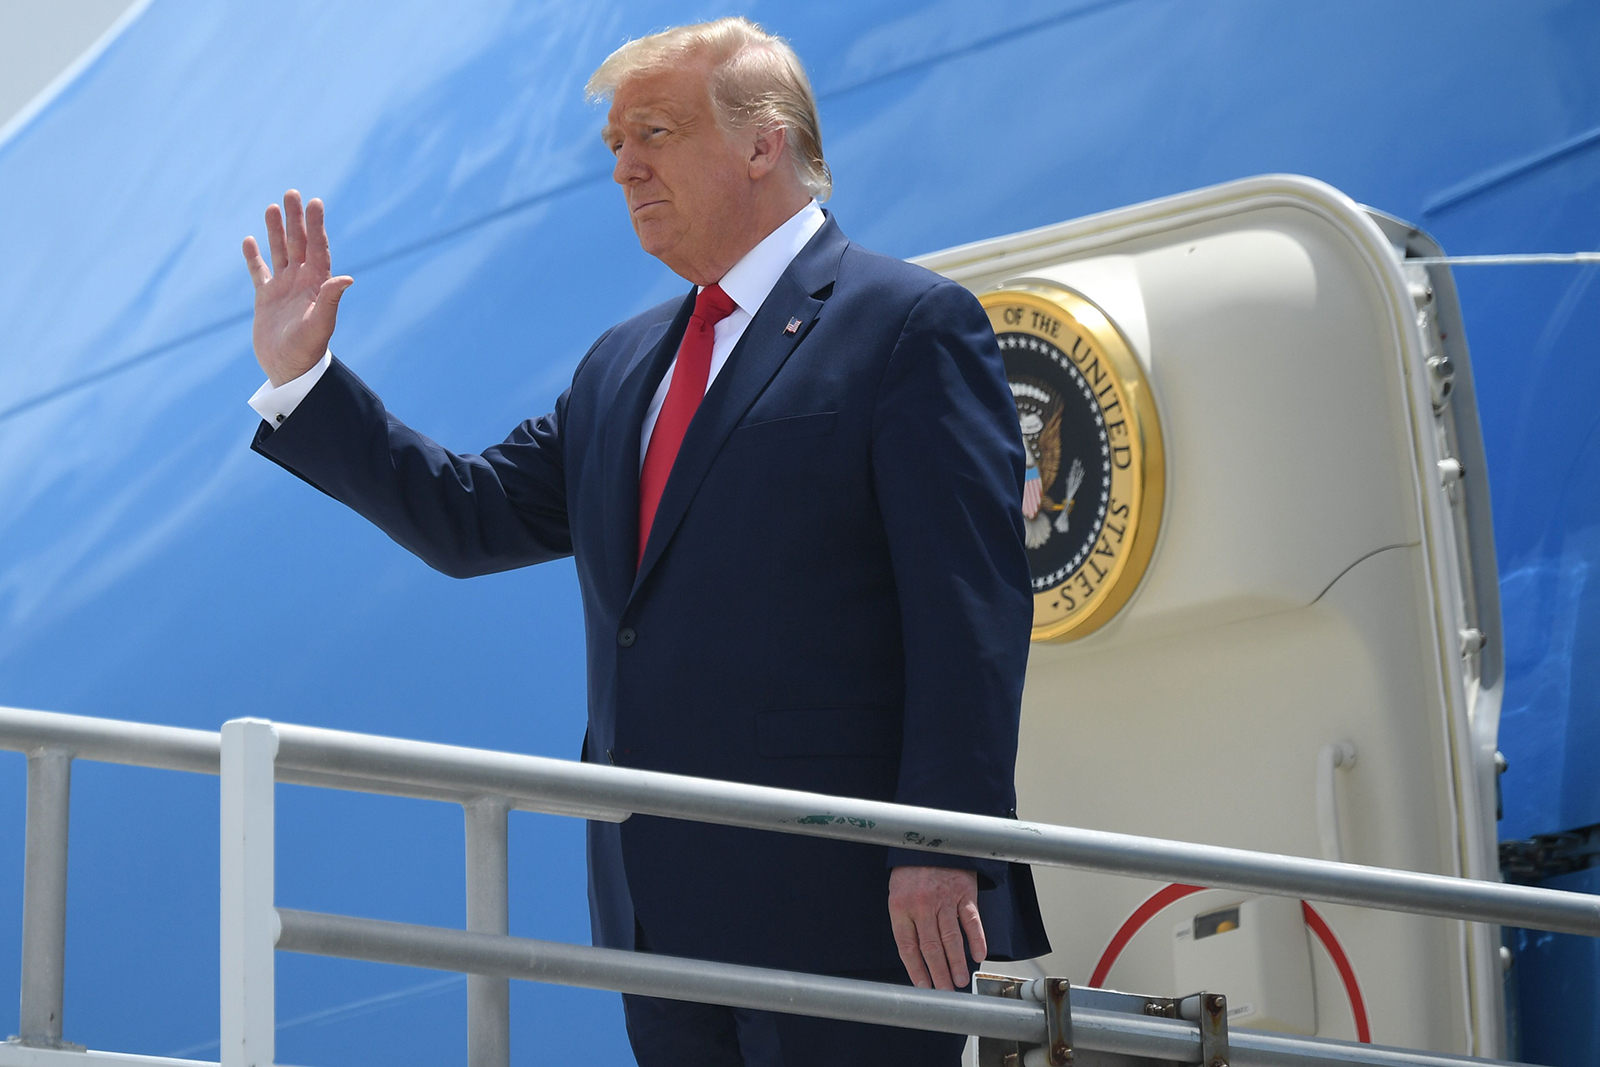 President Donald Trump disembarks from Air Force One upon arrival at Miami International Airport in Miami on July 10.